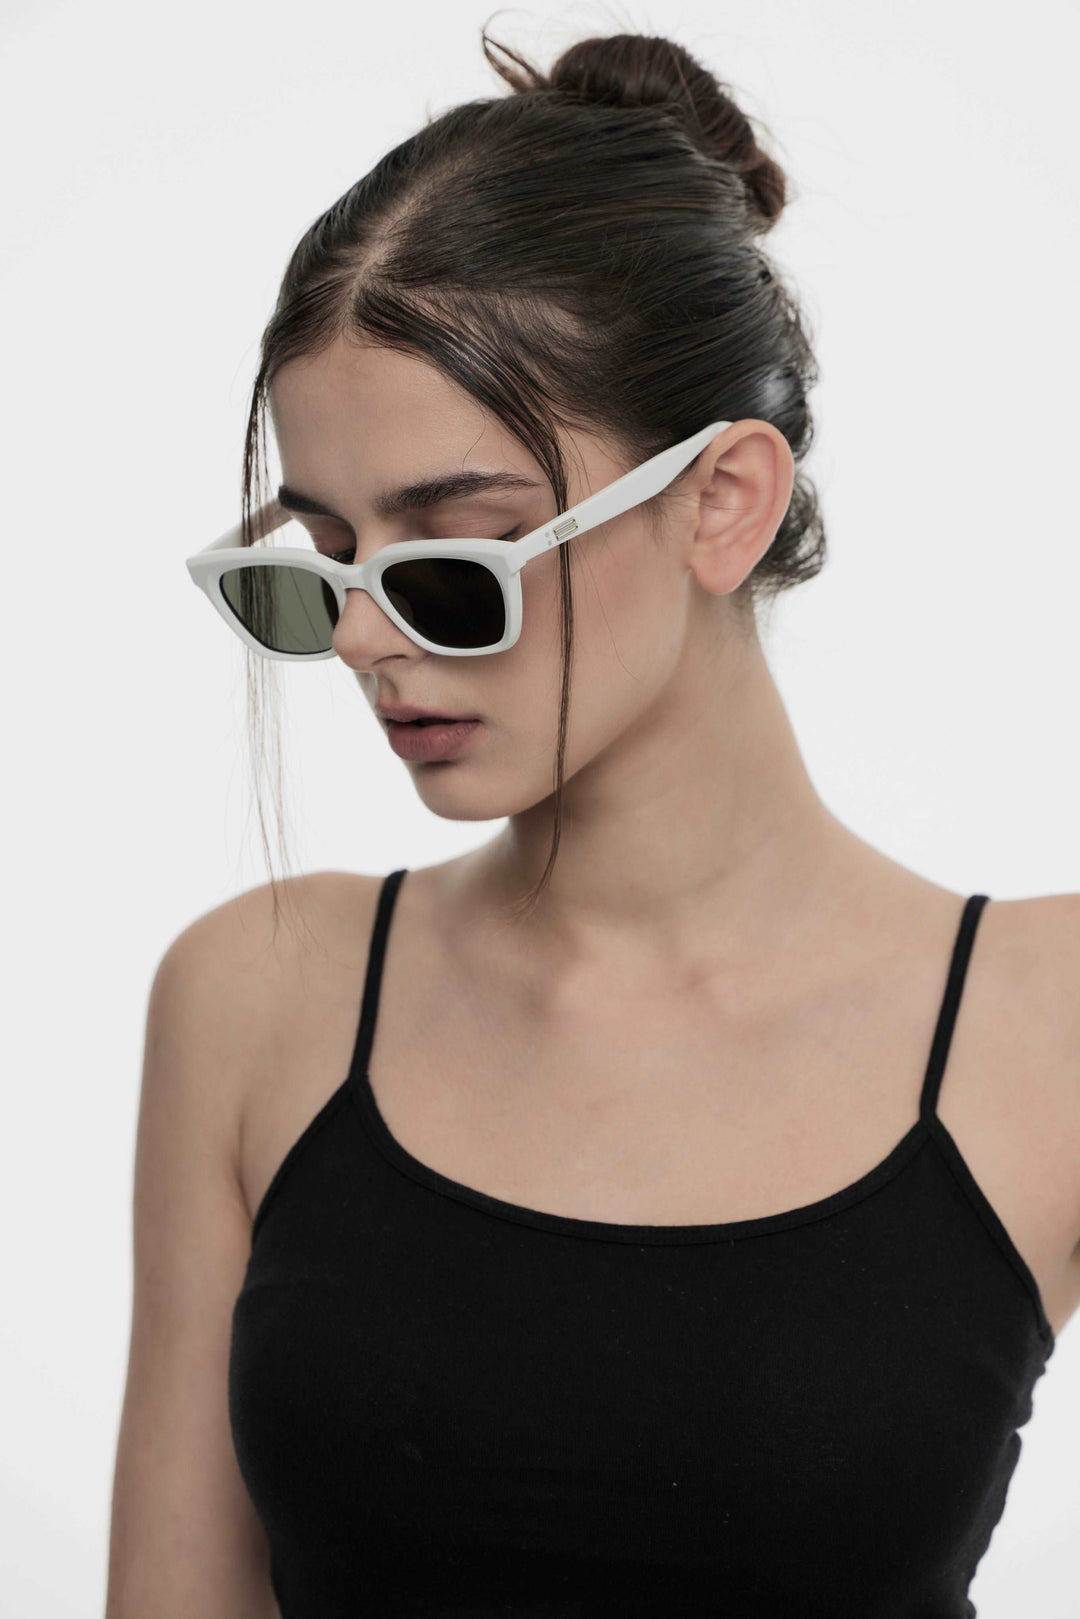 Model of her side face looking down wearing Shadow in white square Kpop Sunglasses from Mercury Retrograde